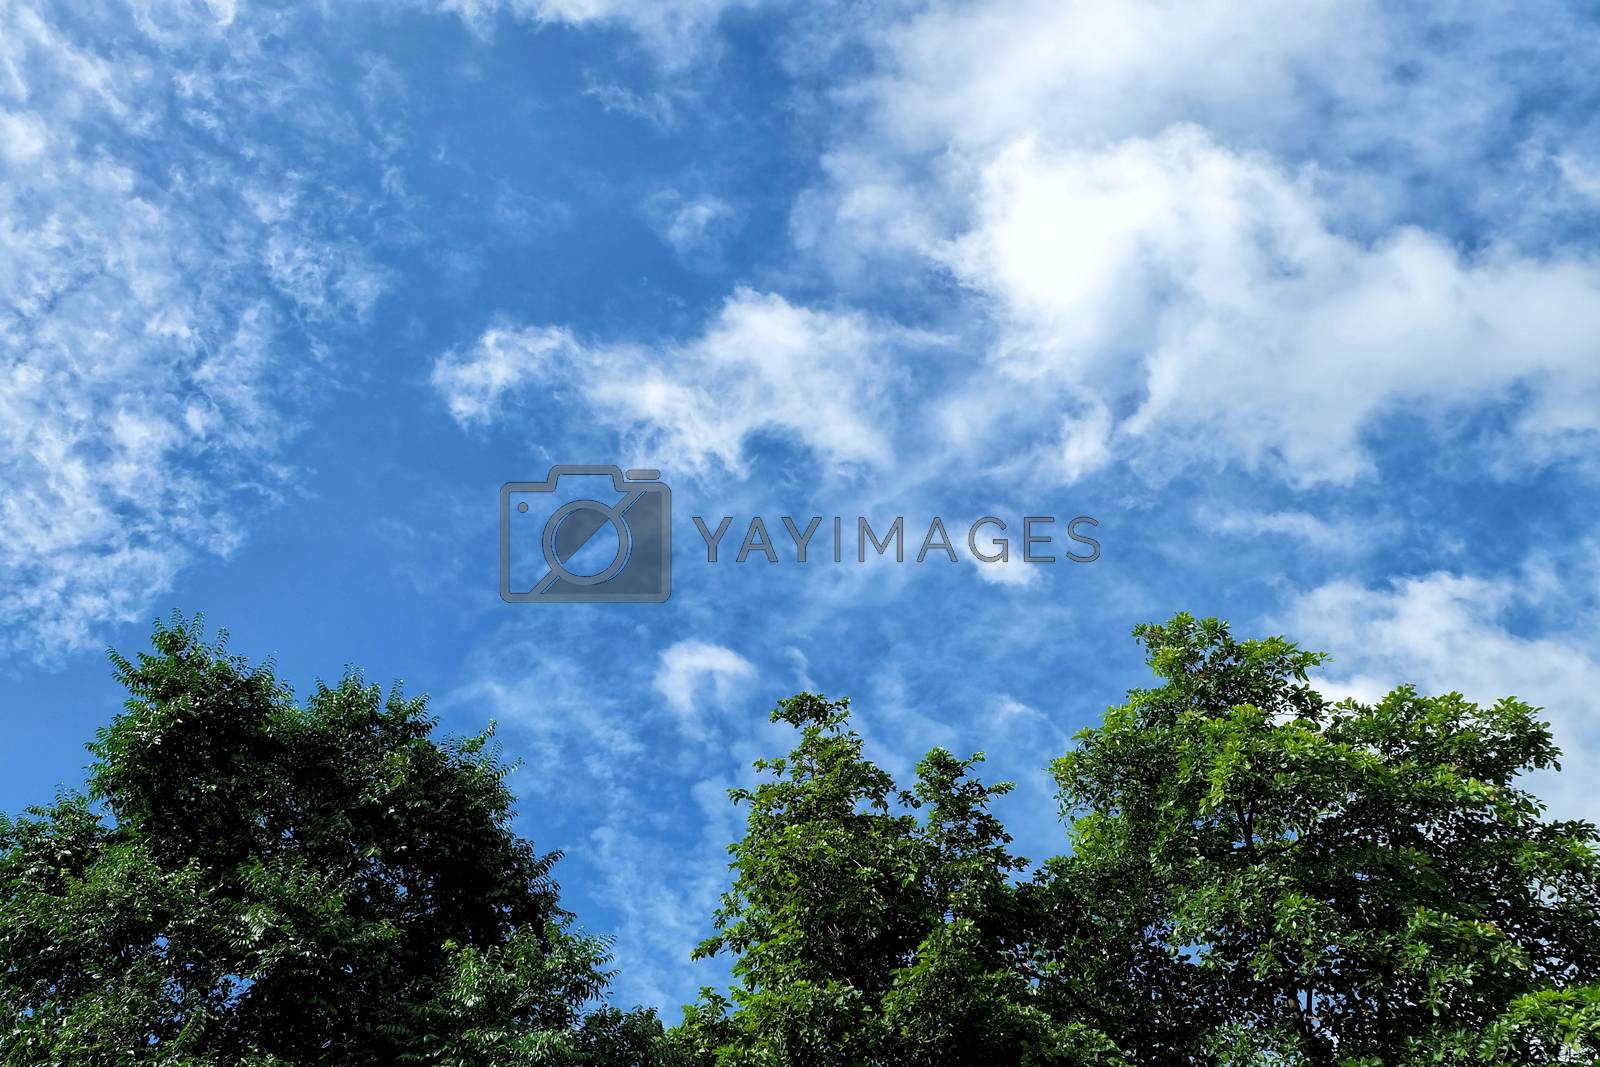 Royalty free image of Blue Sky and Cloud with Tree. by mesamong